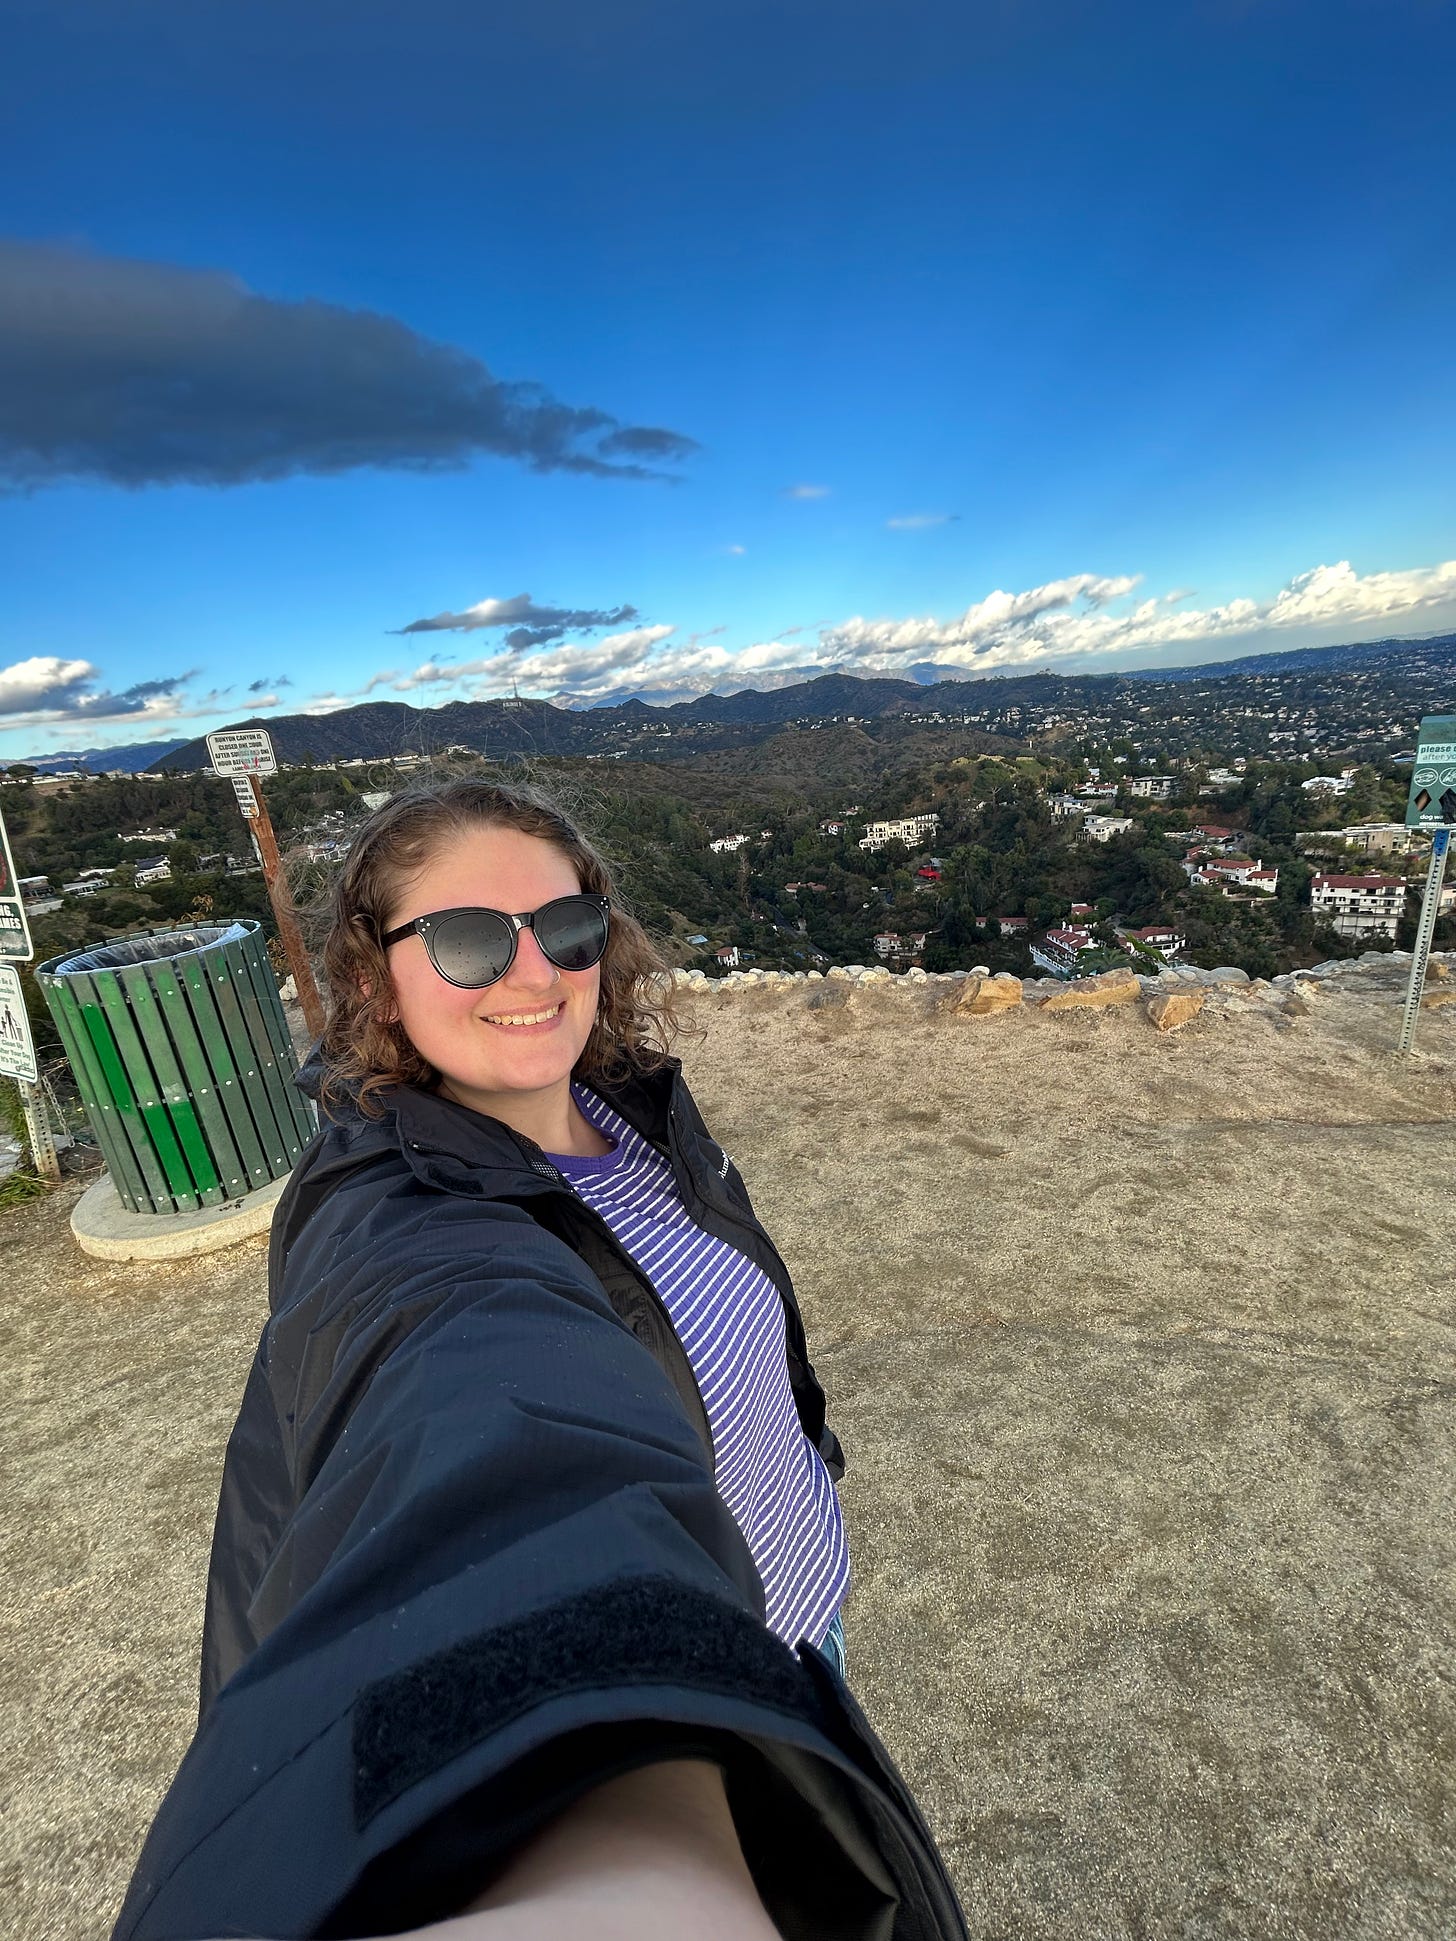 Hannah taking a selfie with the Hollywood sign far in the distance behind her.